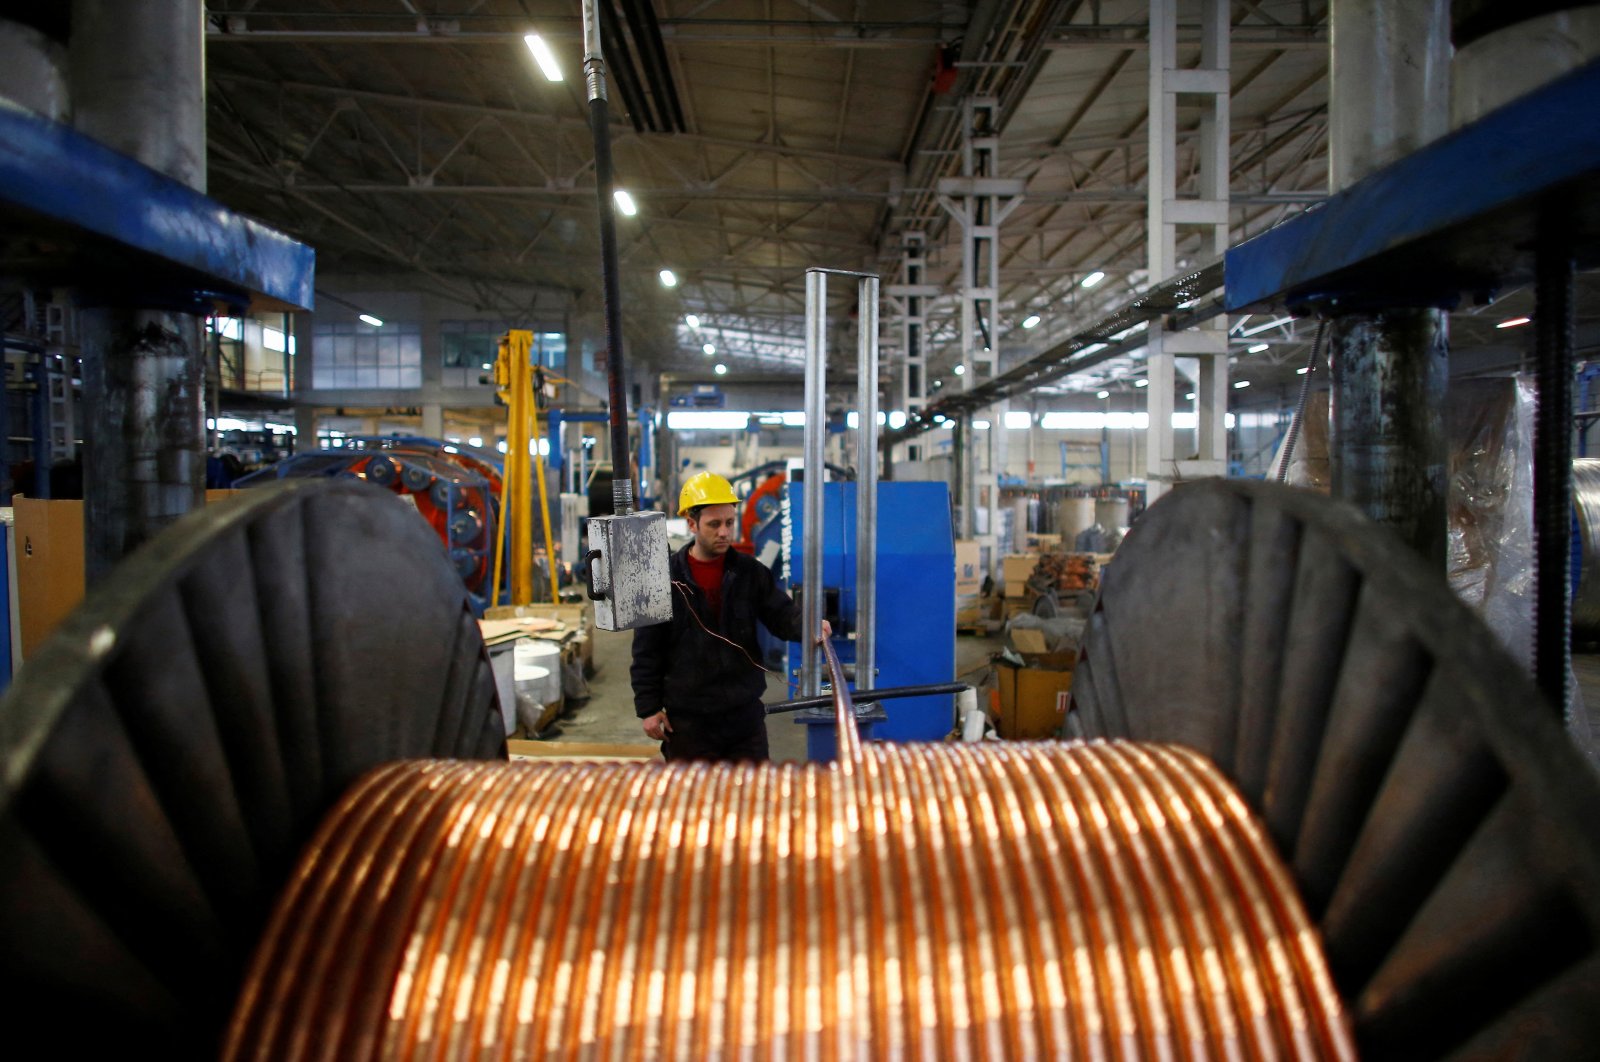 A worker checks copper cables being produced at a factory in the central Anatolian city of Kayseri, Turkey, Feb. 12, 2015. (Reuters Photo)